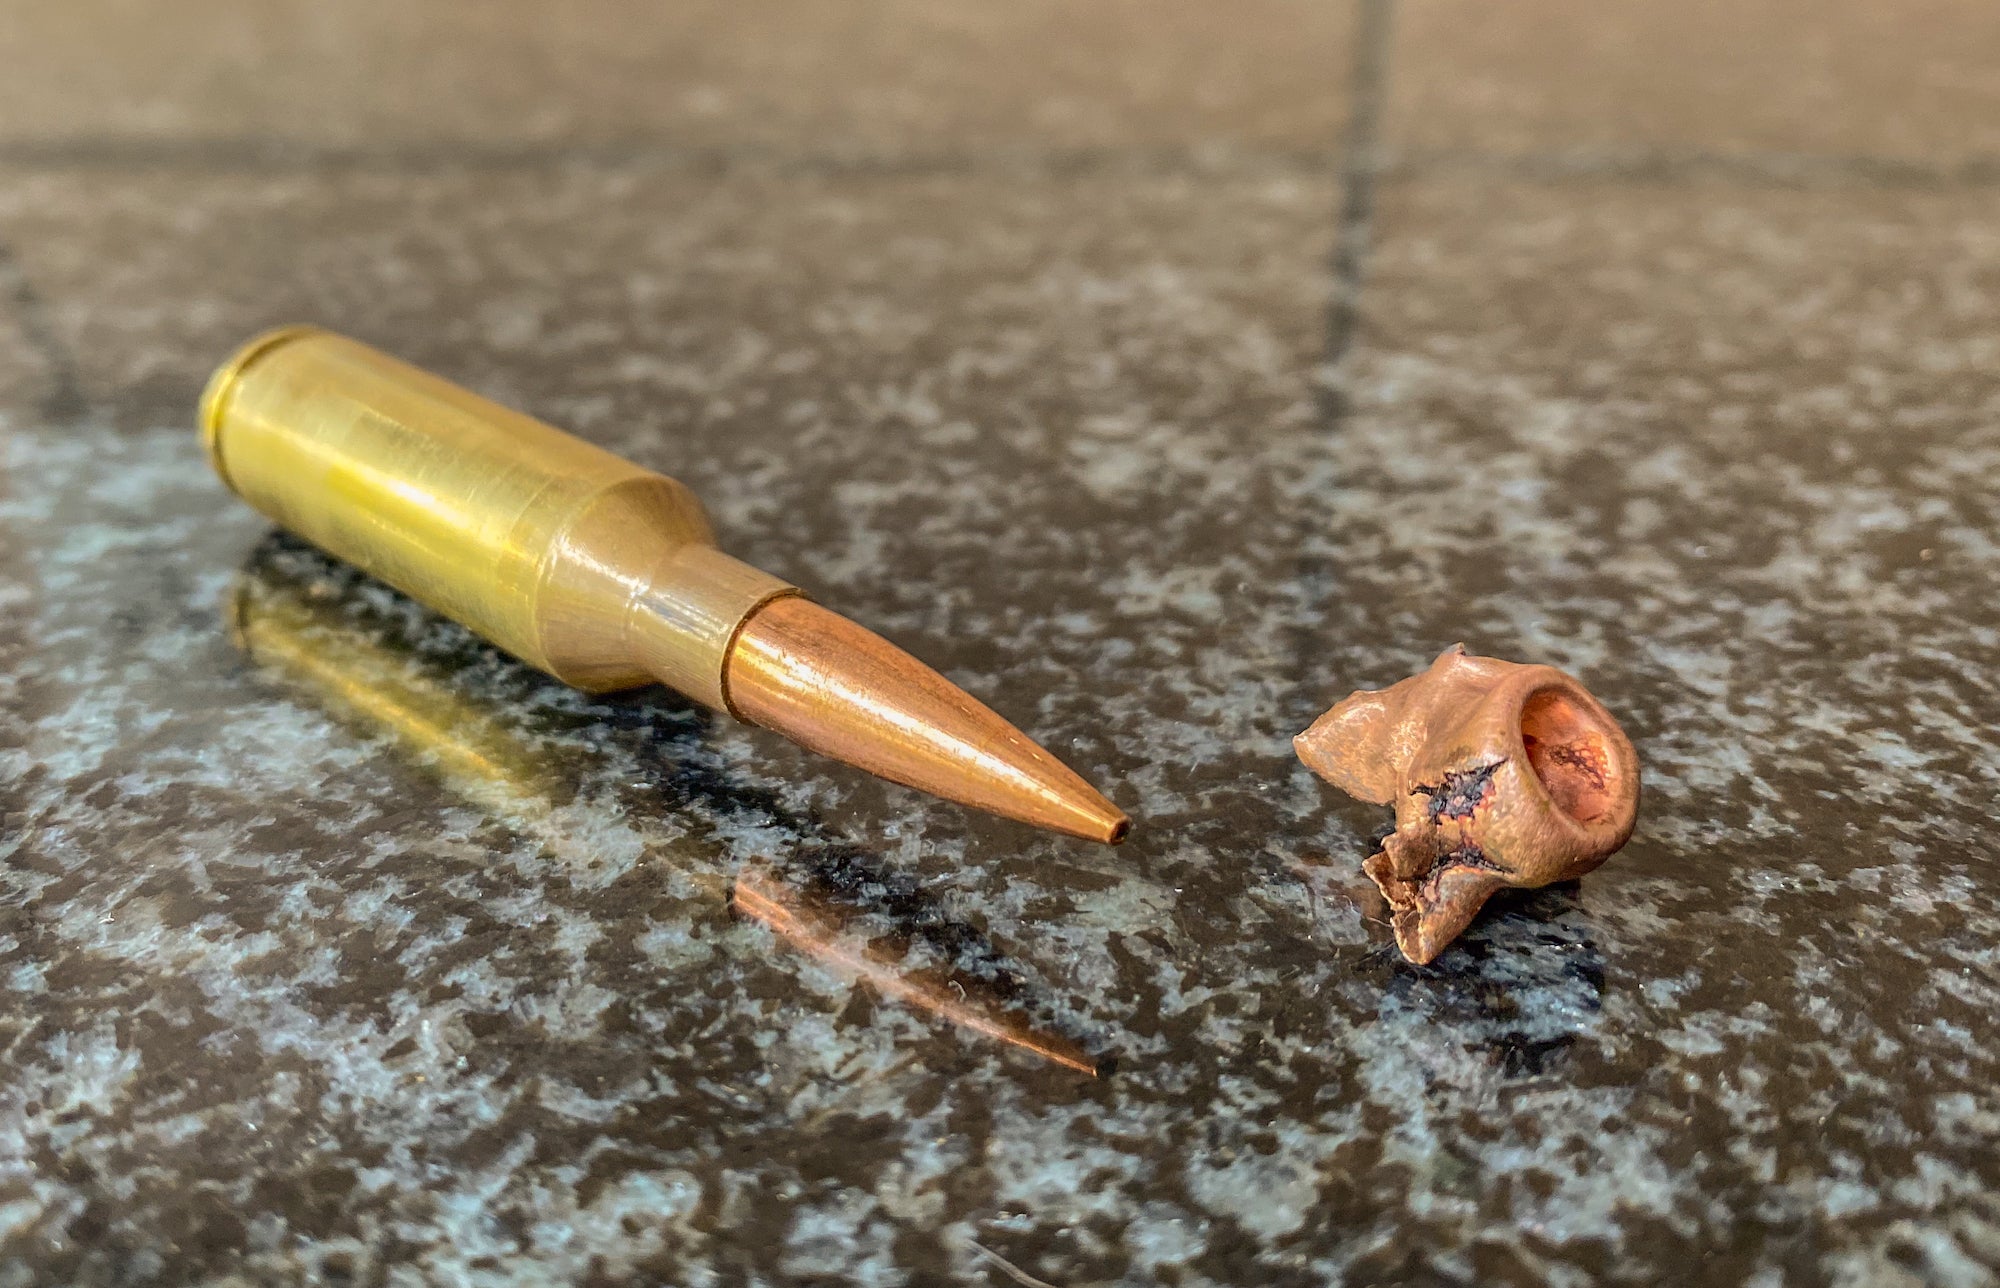 Expanded bullet on a table.